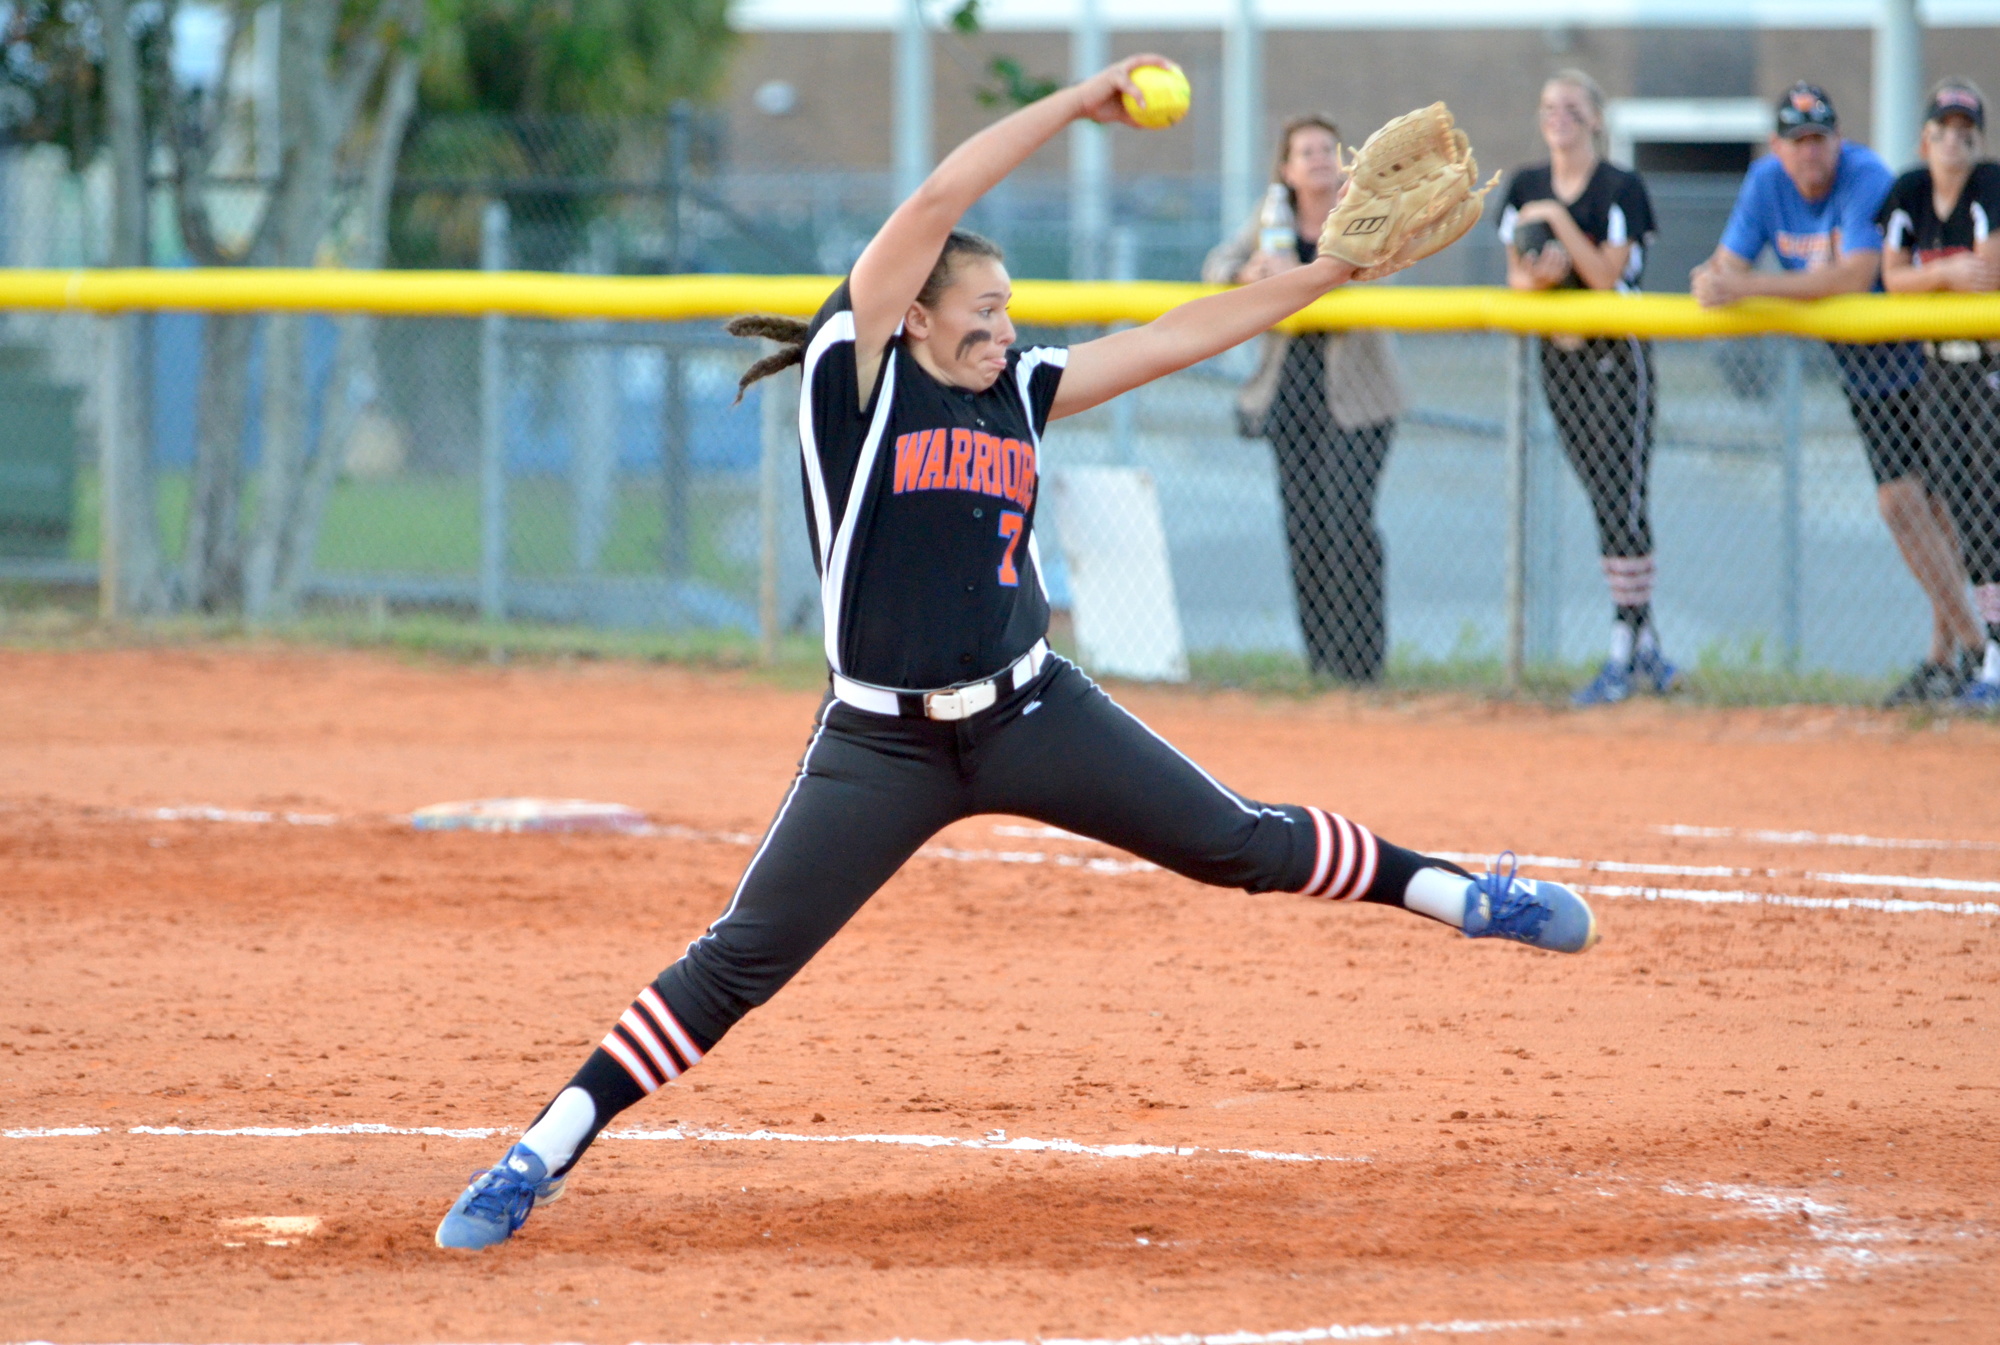 Katie Benedict got the call up from junior varsity during the season and has pitched nine innings for West Orange.